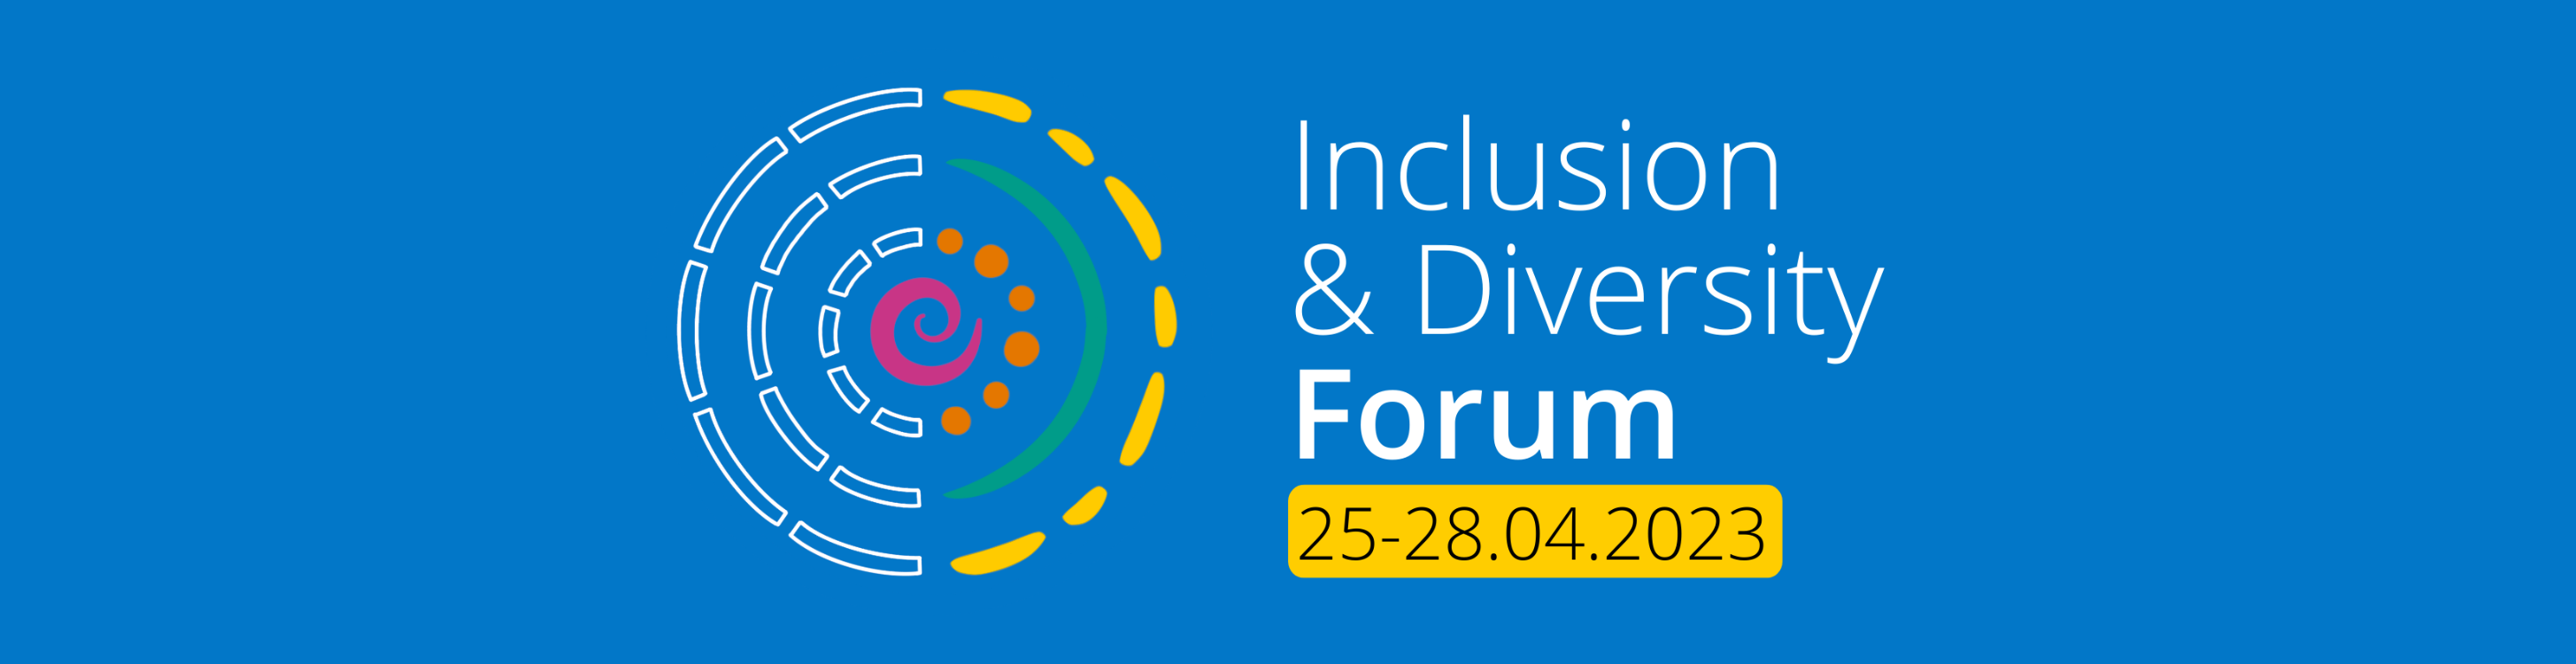 Picture: Inclusion and diversity forum, save the date! Ostend, Belgium, from November 29 to December 2, 2021